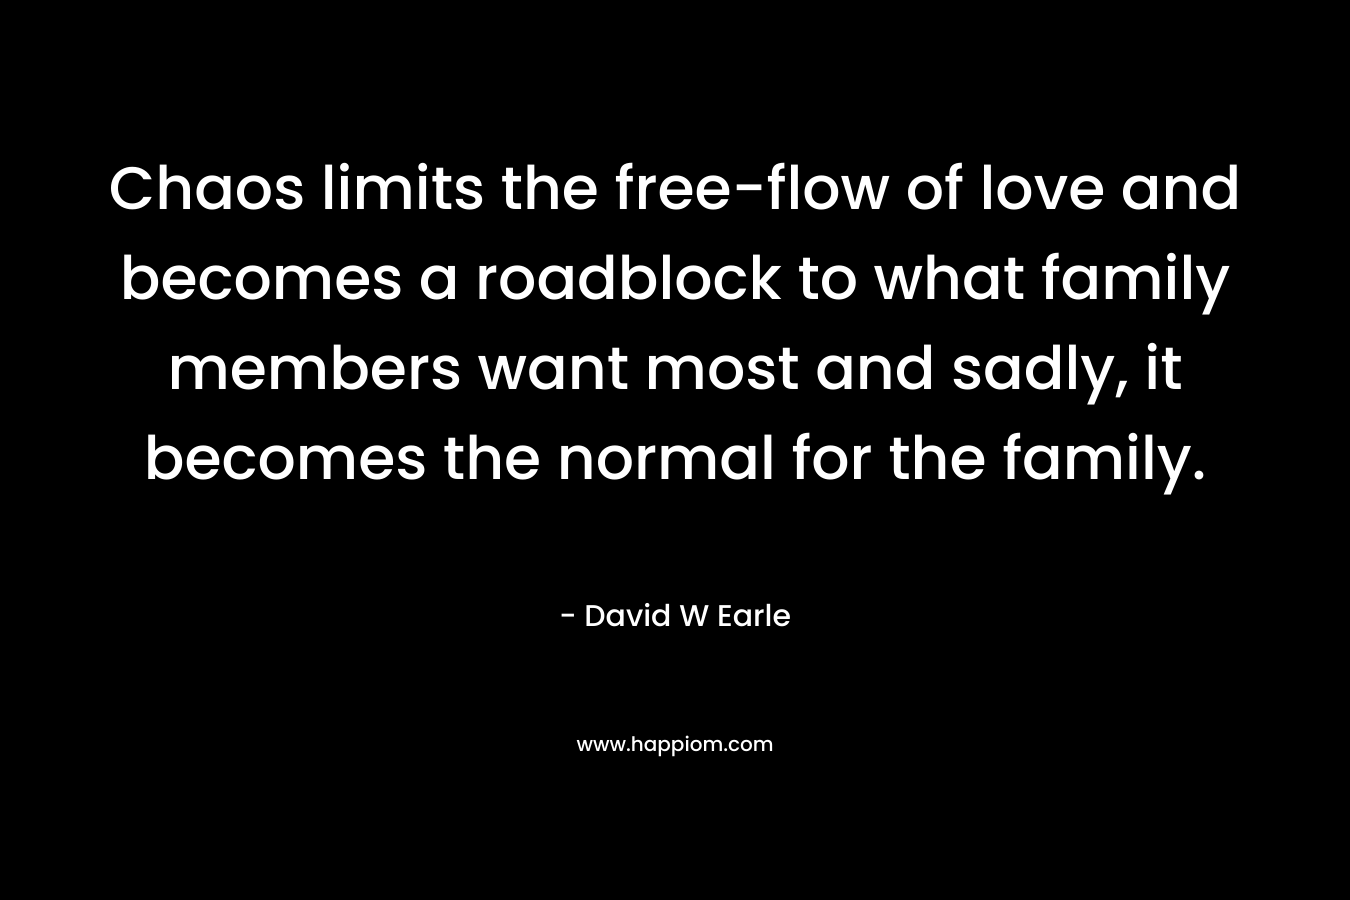 Chaos limits the free-flow of love and becomes a roadblock to what family members want most and sadly, it becomes the normal for the family. – David W Earle